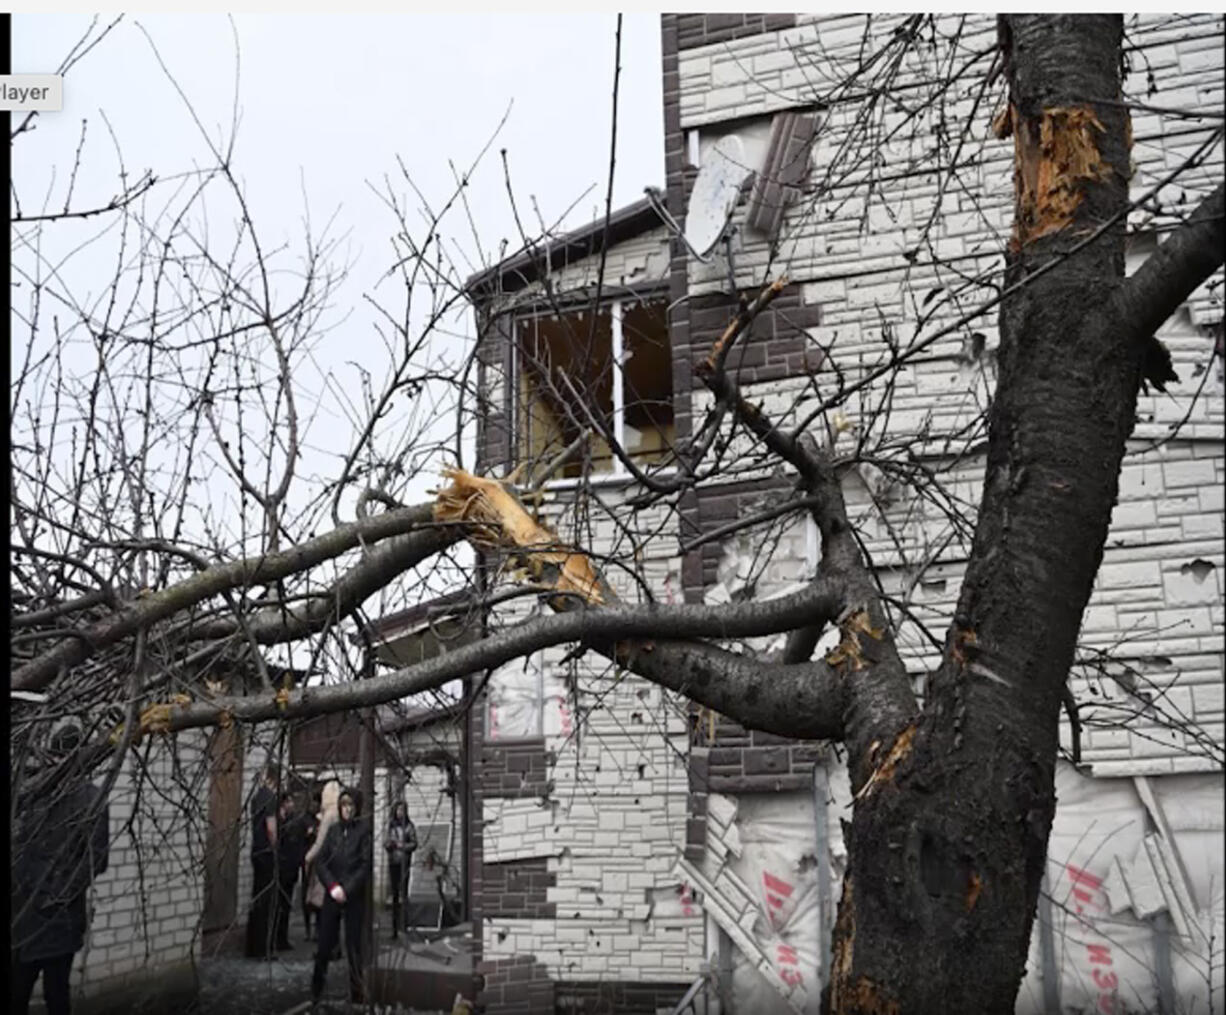 A damaged building following a strike in Belgorod, Russia, Thursday, Feb. 15, 2024. Officials say a missile strike on the Russian city of Belgorod near the Ukraine border in what appears to be the latest exchange of long-range missile and rocket fire between the two countries.